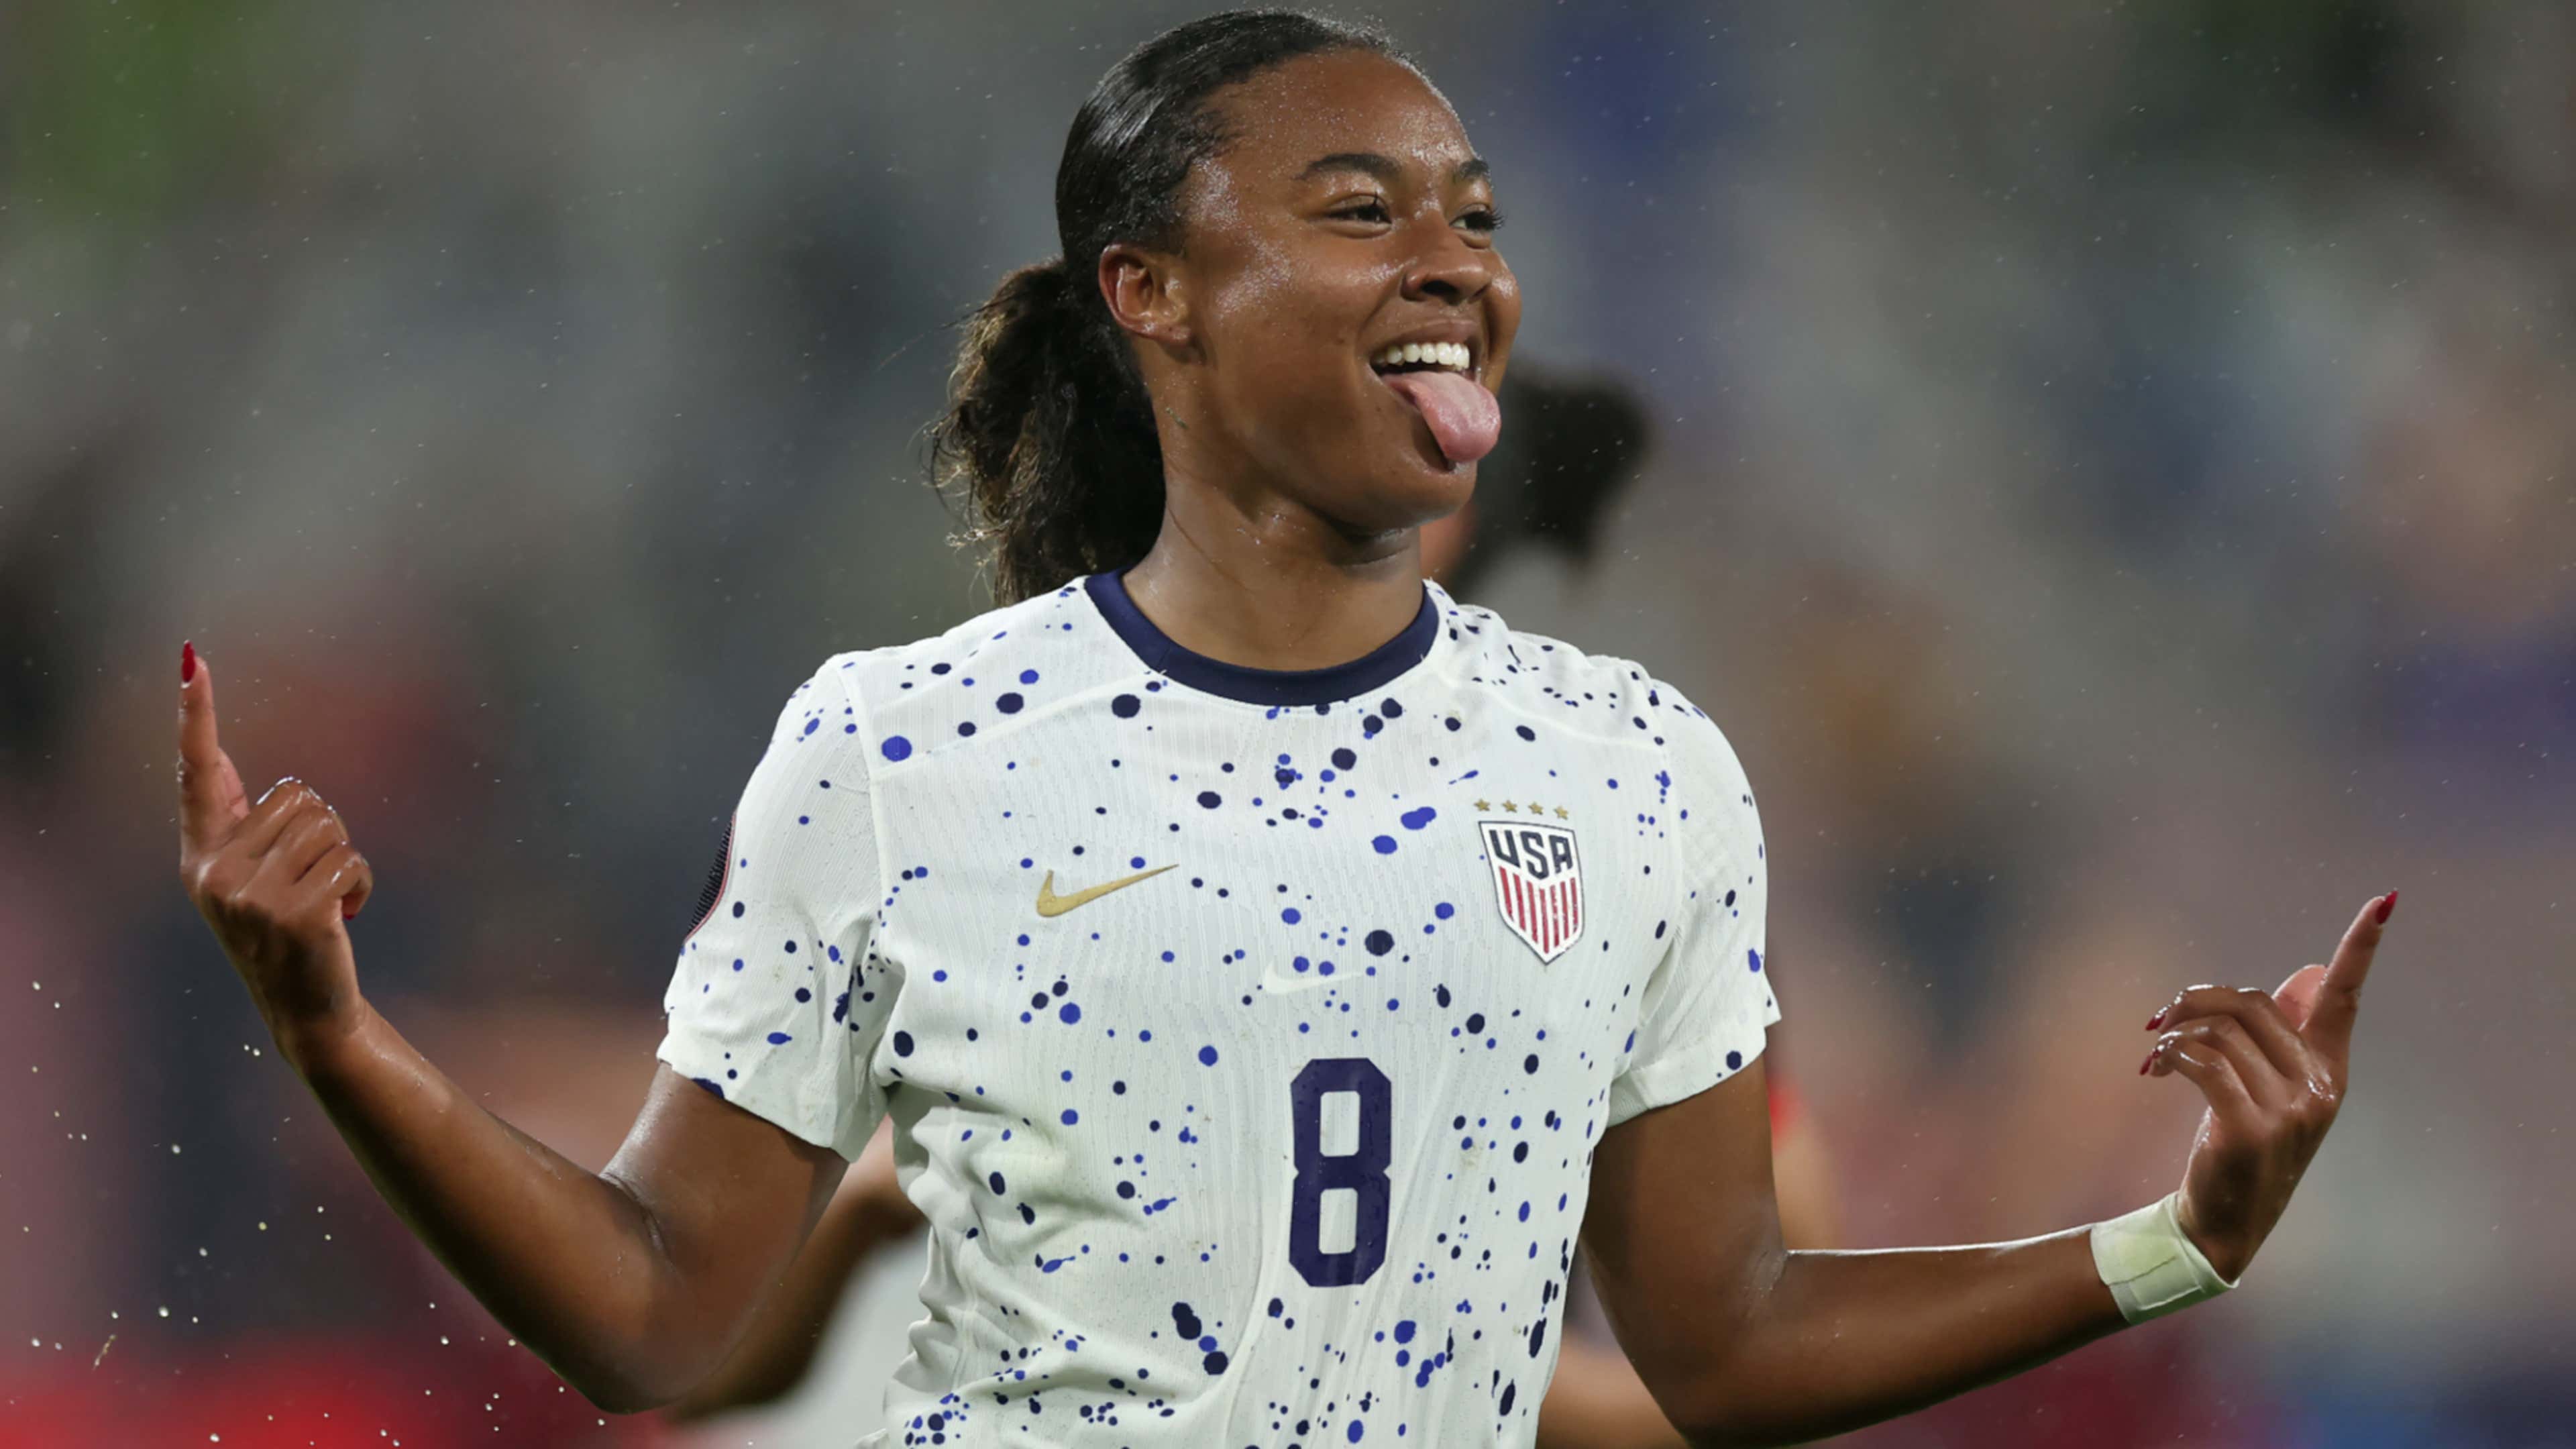 USWNT wins W Gold Cup on the backs of 2 young midfielders once overlooked  for World Cup - Yahoo Sports